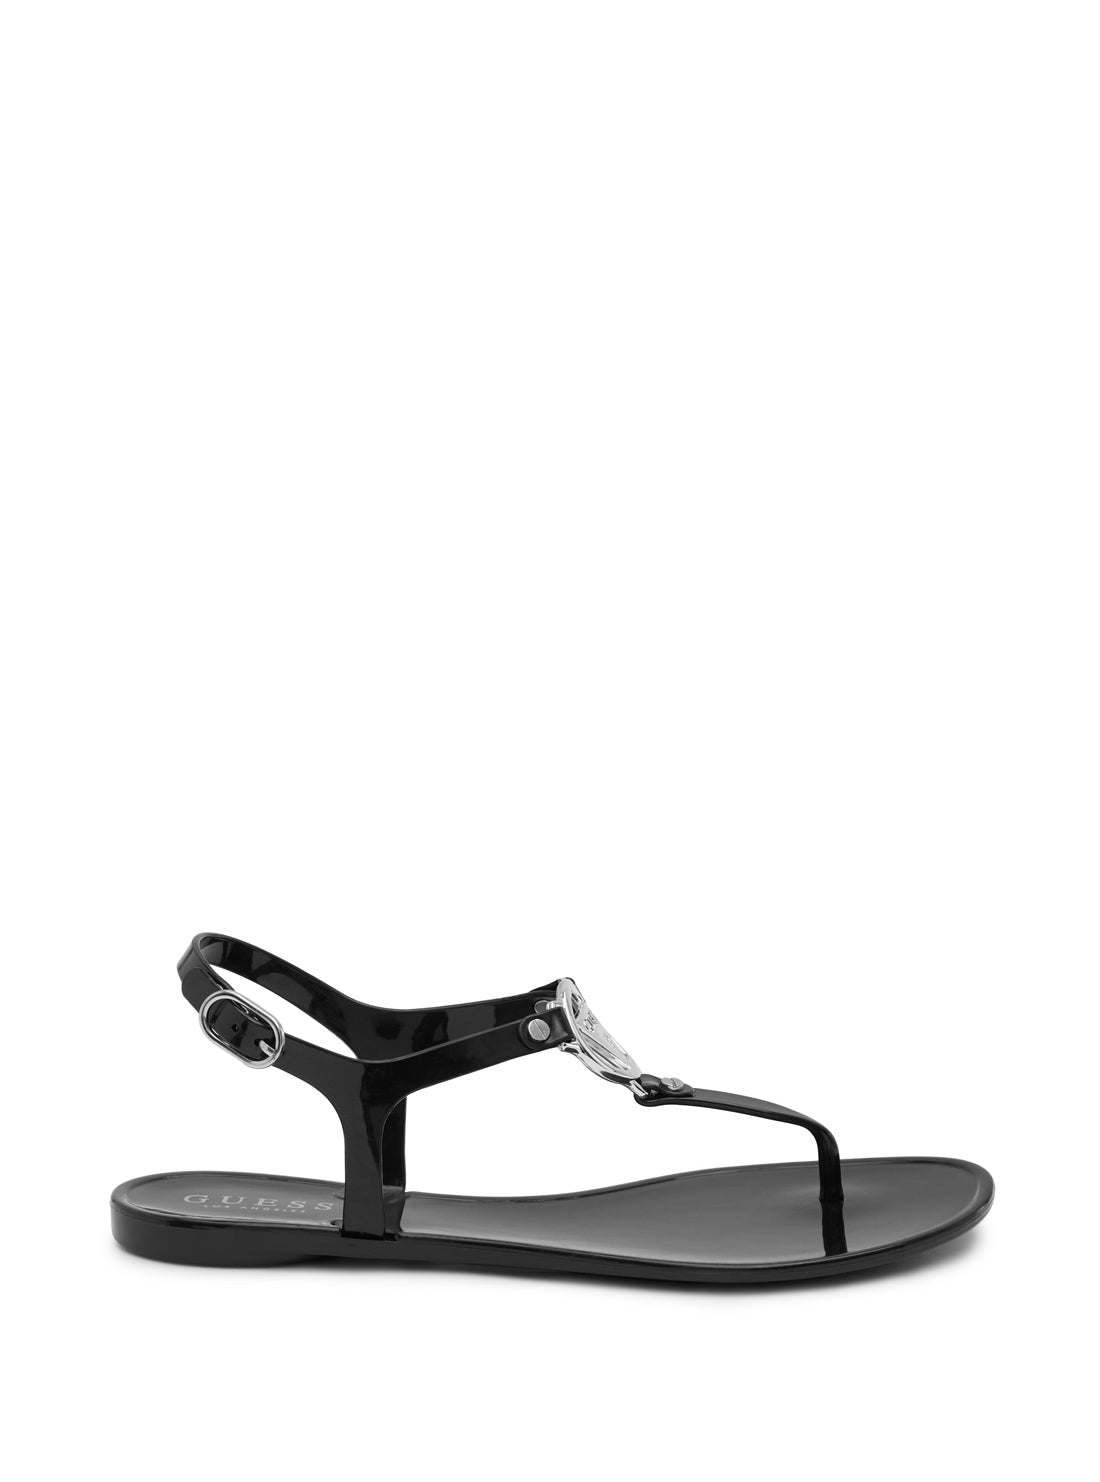 GUESS Women's Black Replace Logo Sandals REPLACE Side View